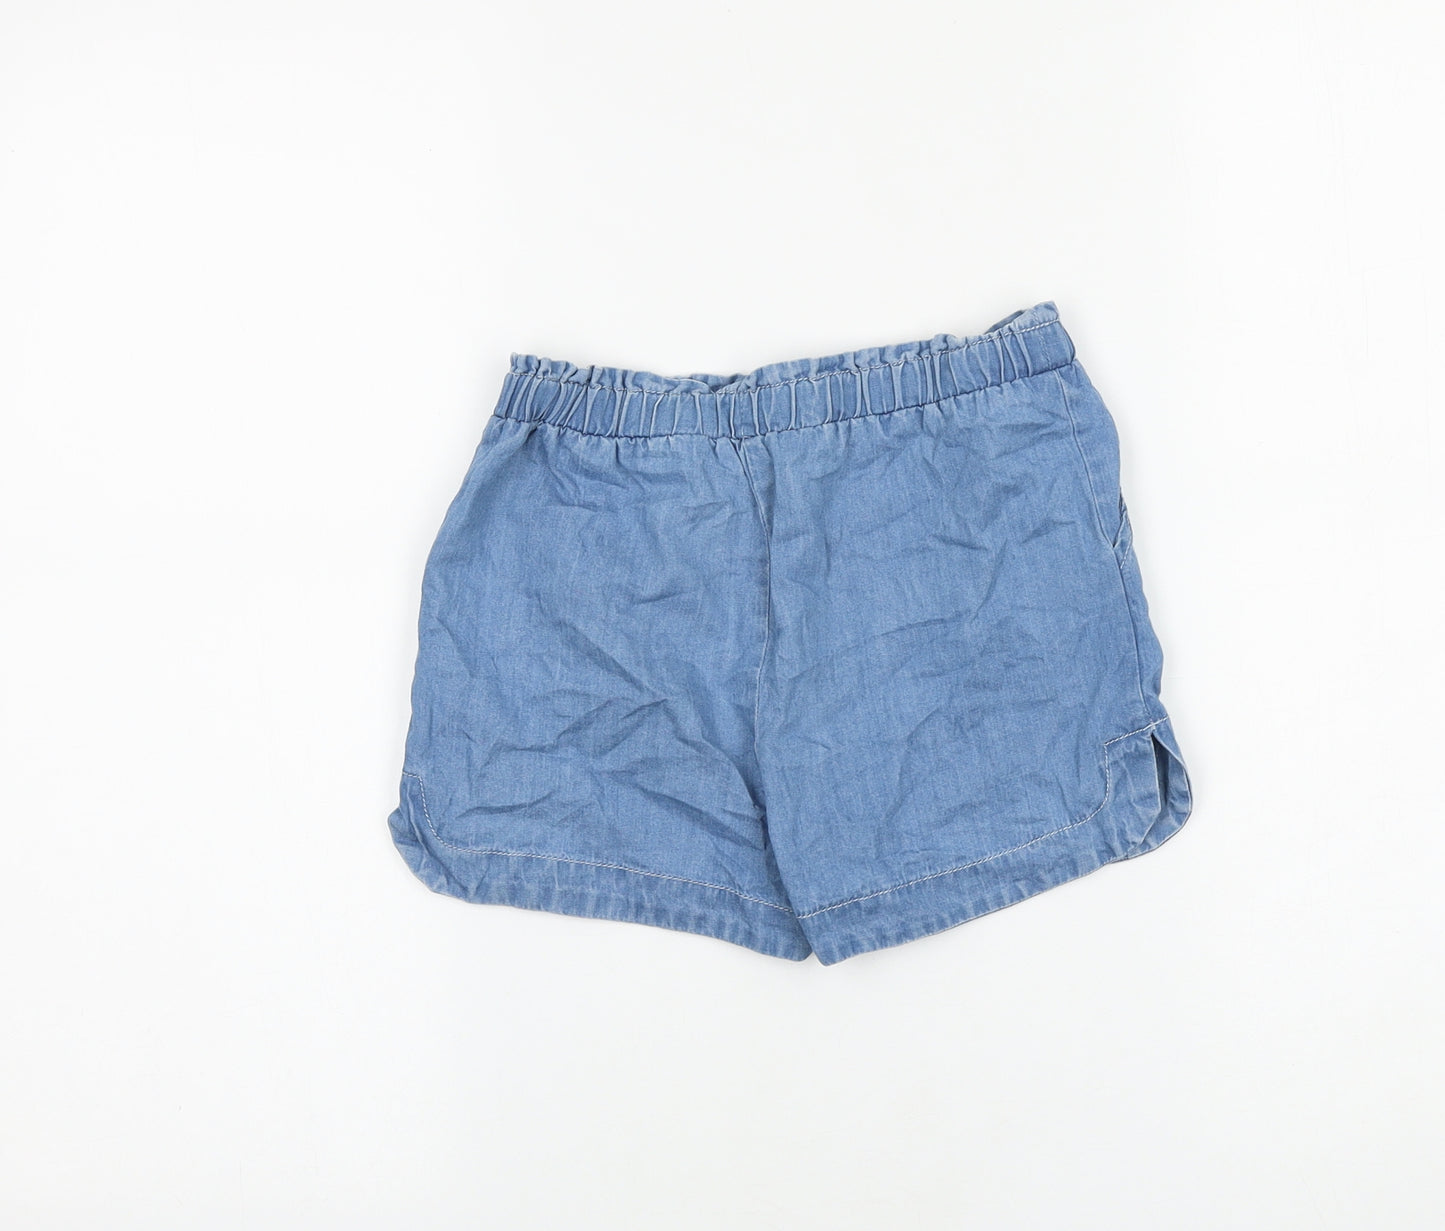 Very Girls Blue 100% Cotton Hot Pants Shorts Size 8 Years Regular Tie